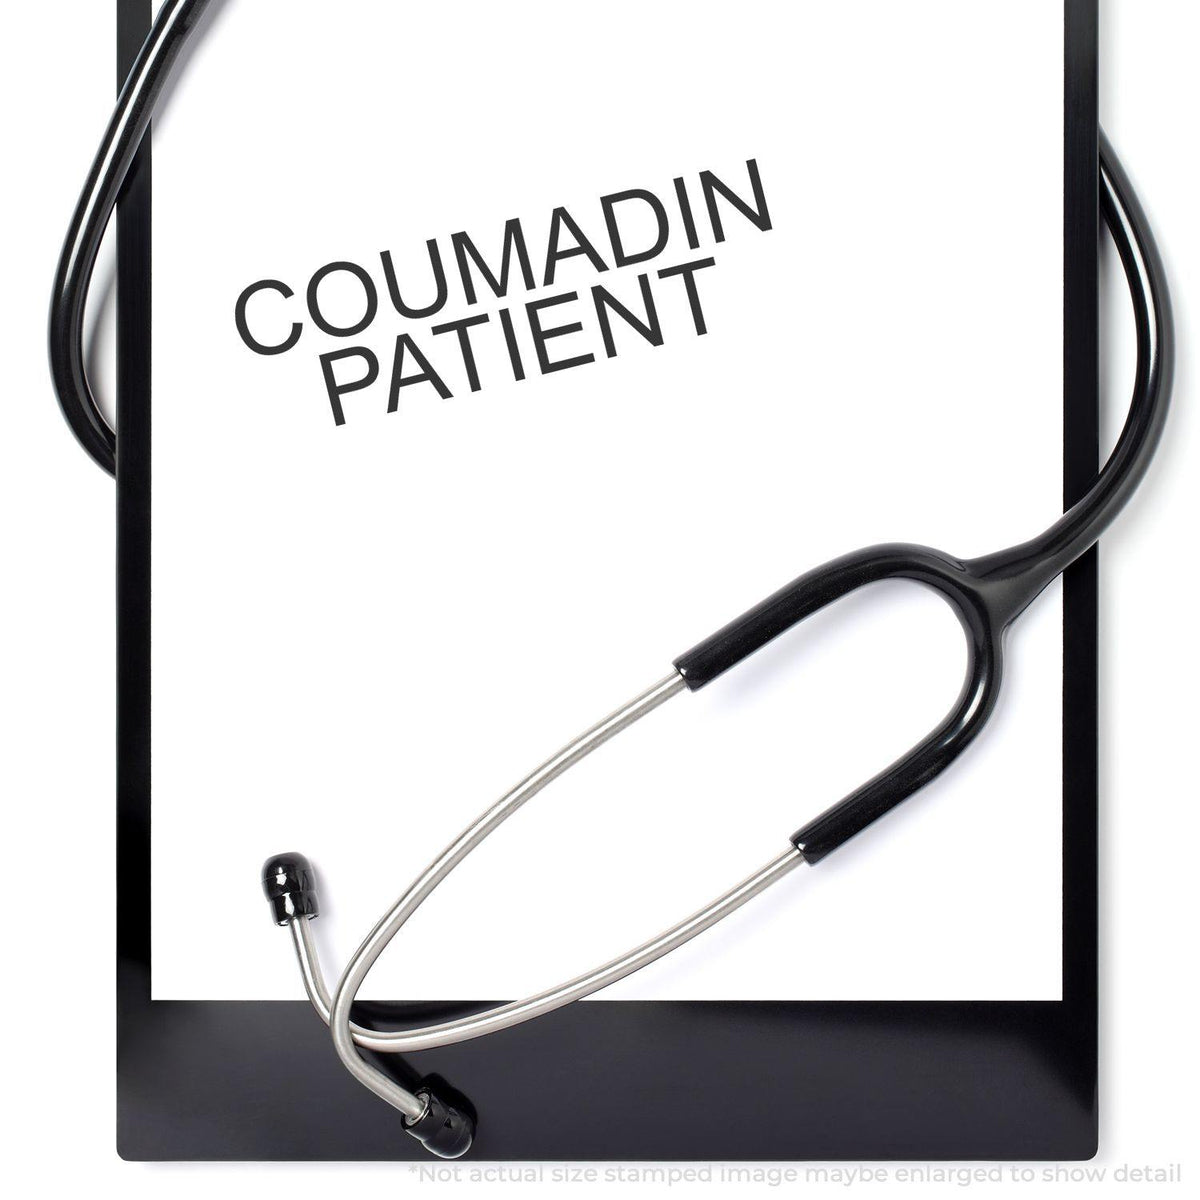 Large Coumadin Patient Rubber Stamp In Use Photo